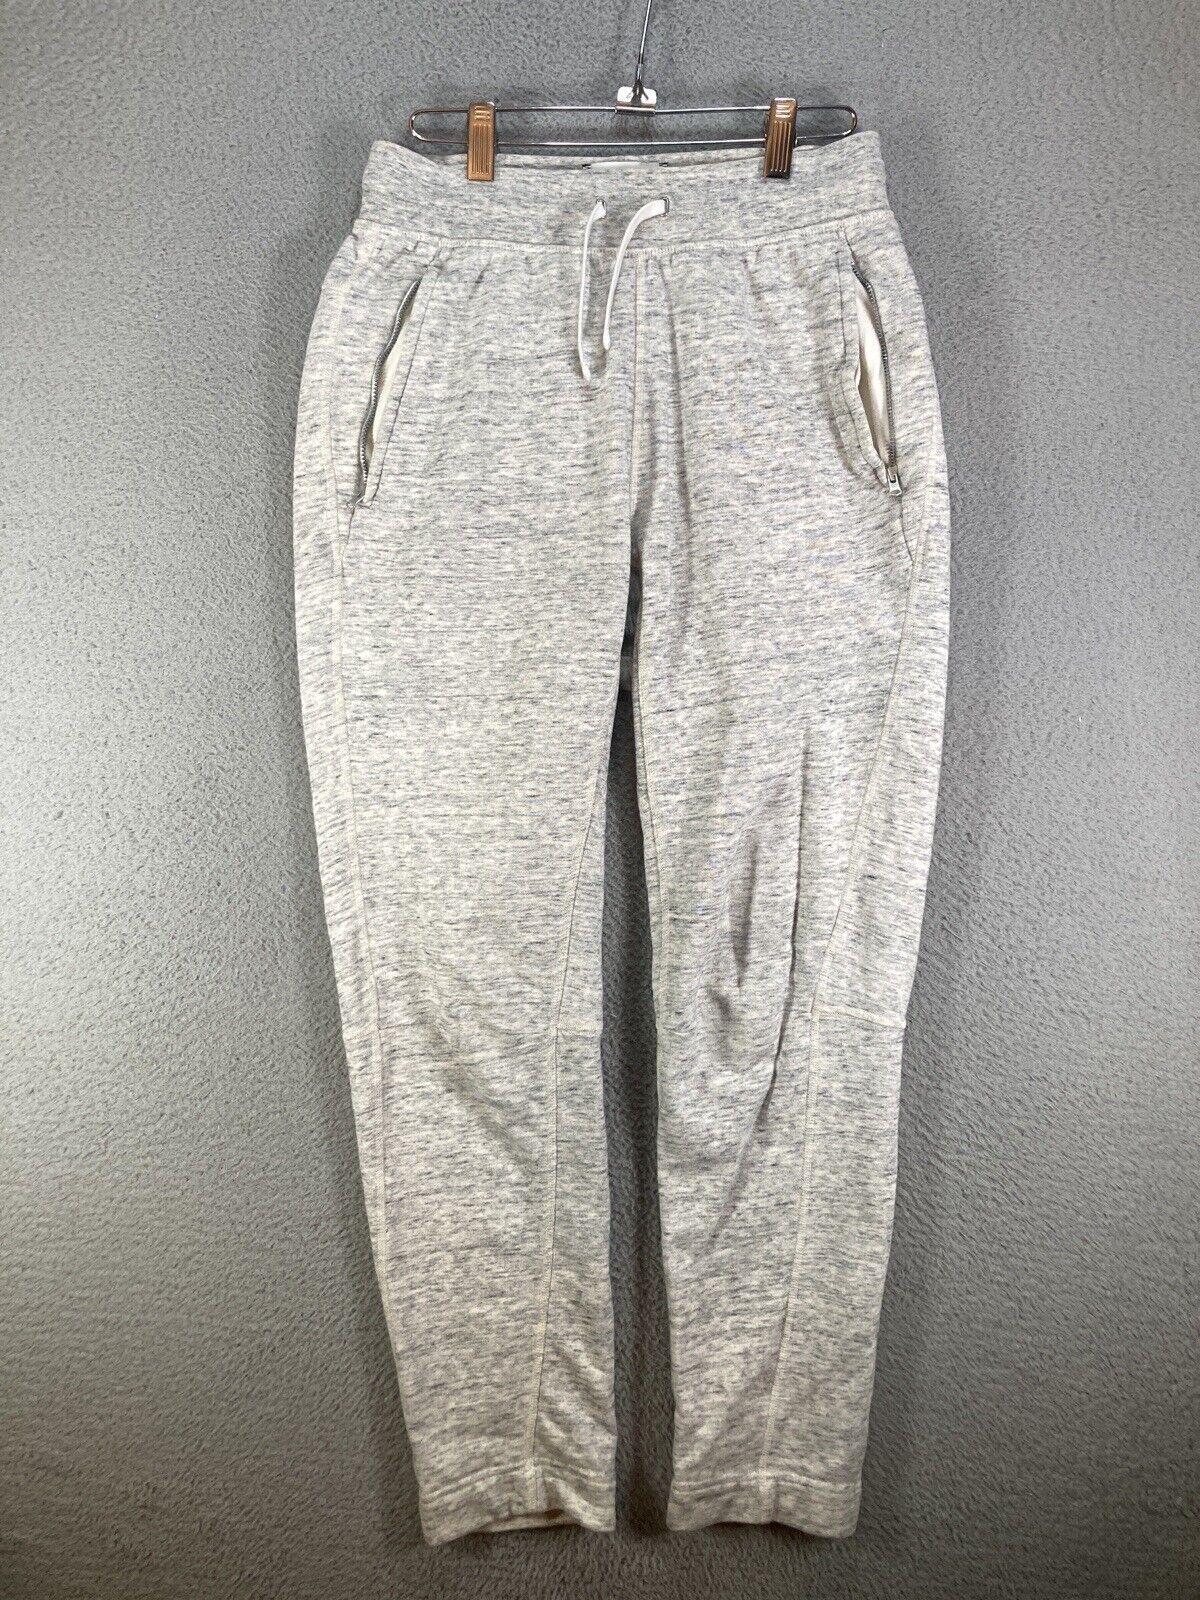 Reigning Champ Joggers Mens Small Gray Adidas Tapered Drawstring Stretch Pants